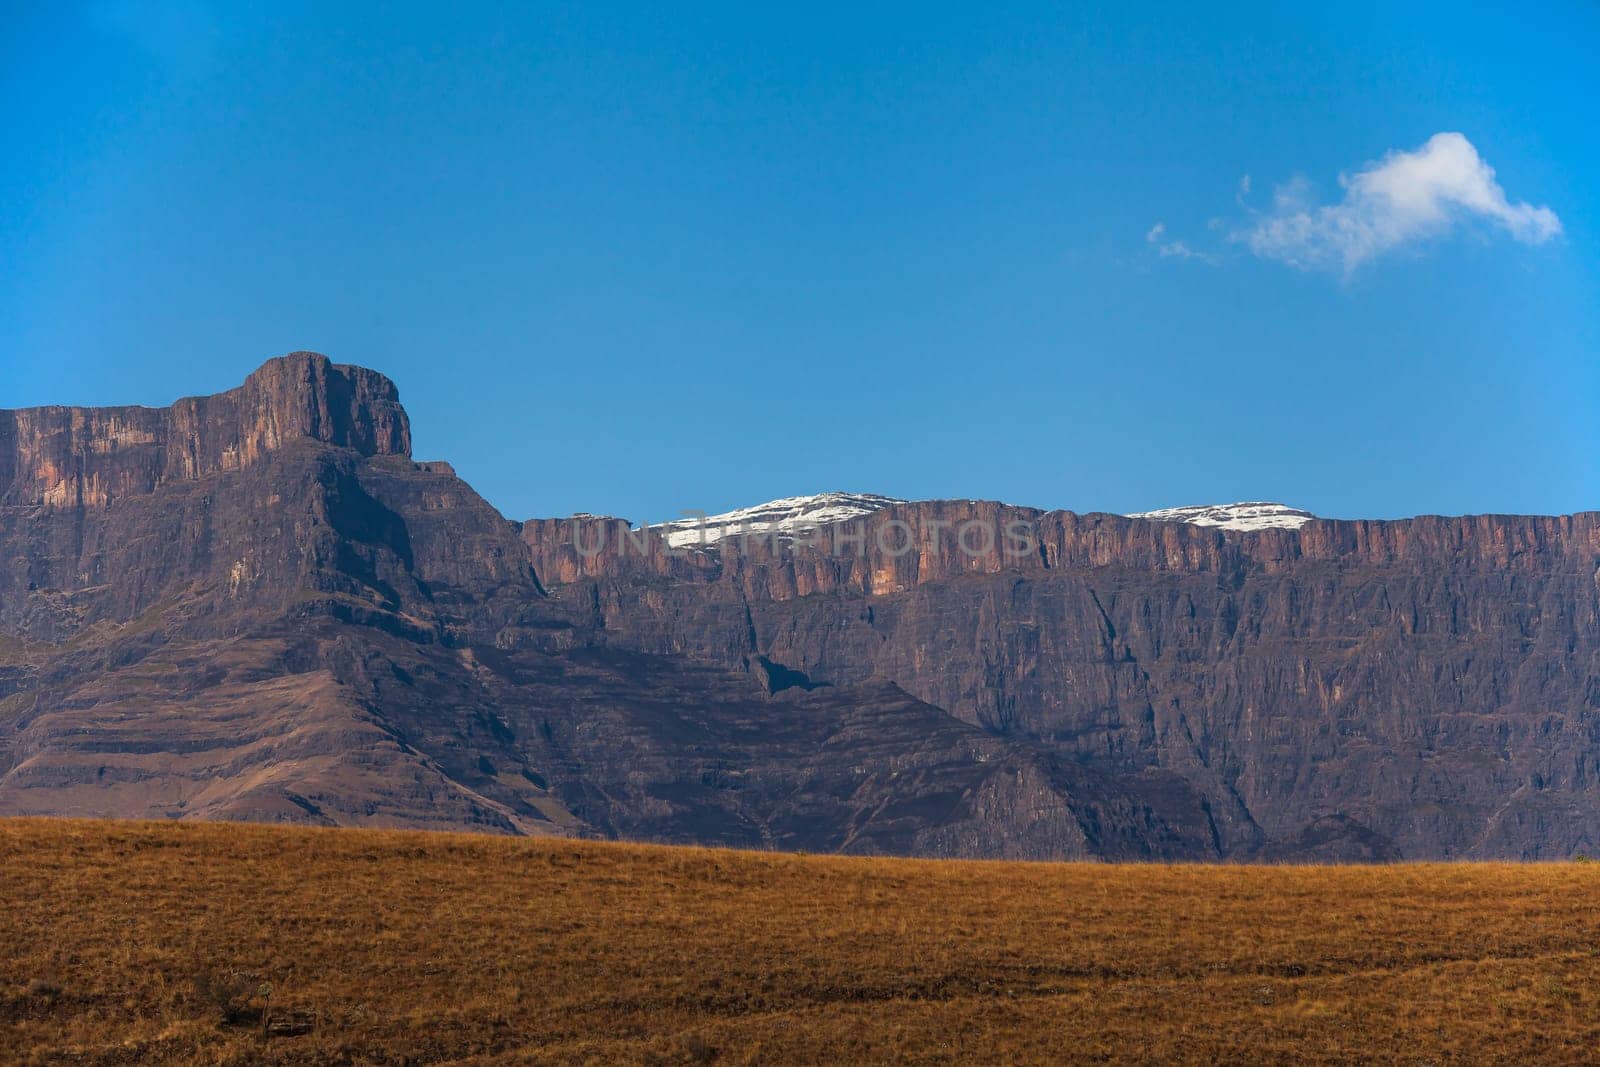 The Amphitheater formation with a light dusting of snow seen from the Royal Natal National Park in the Drakensberg South Africa